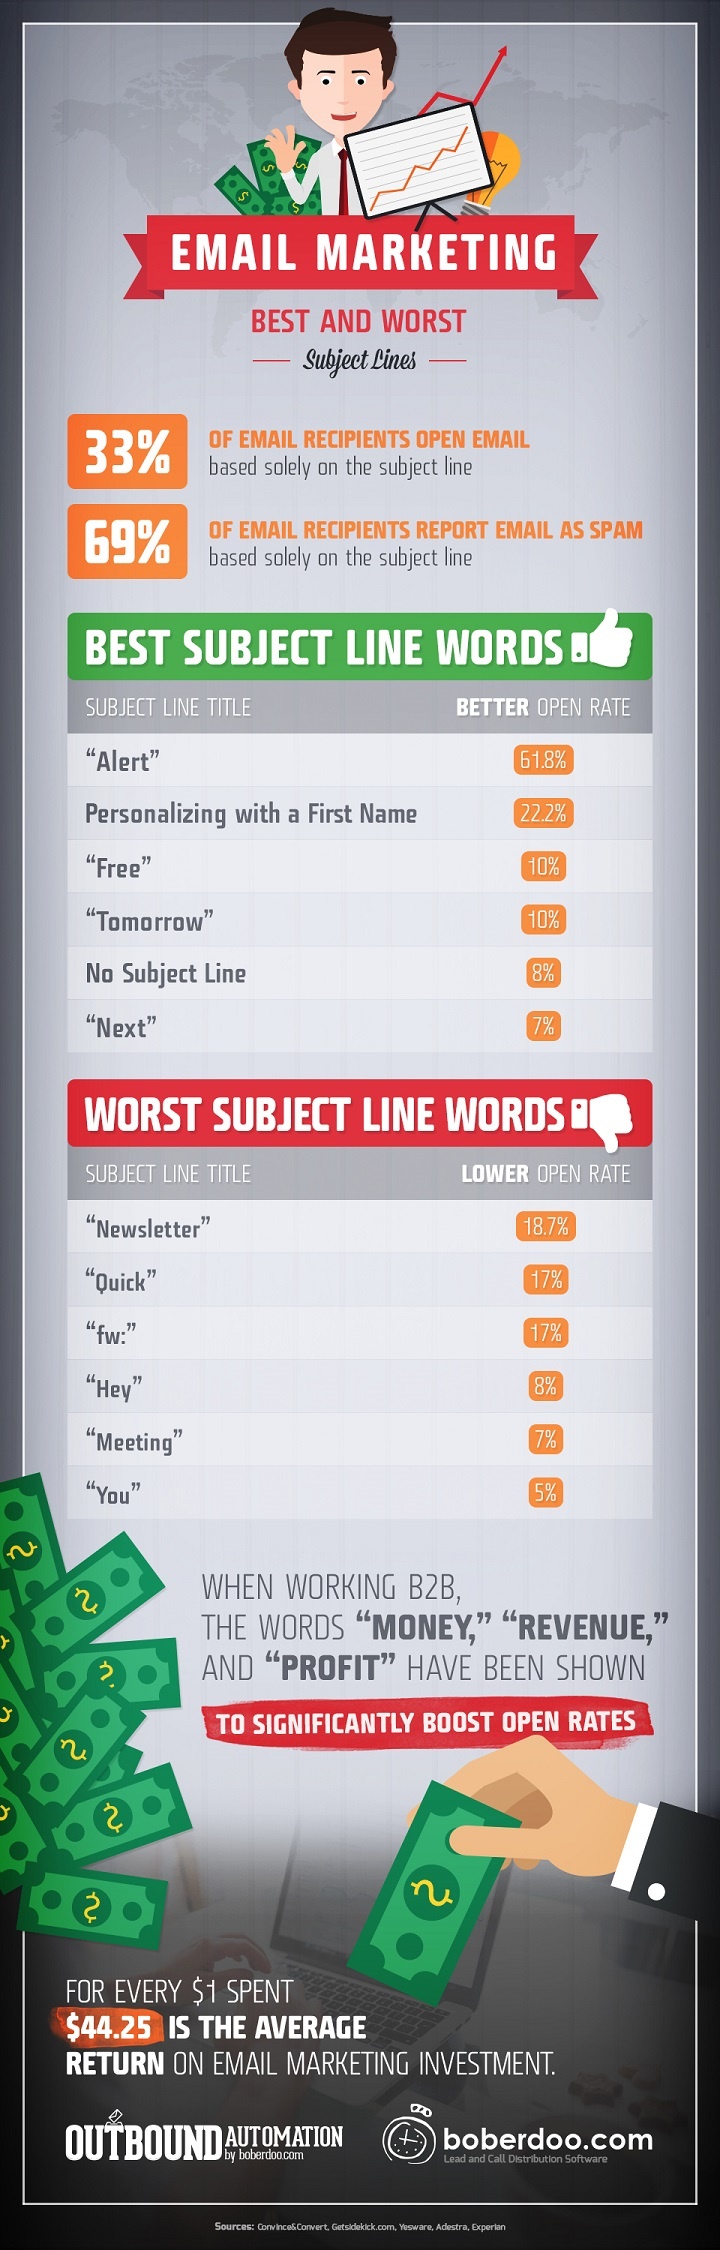 best and worst subject lines for email marketing by boberdoo.com